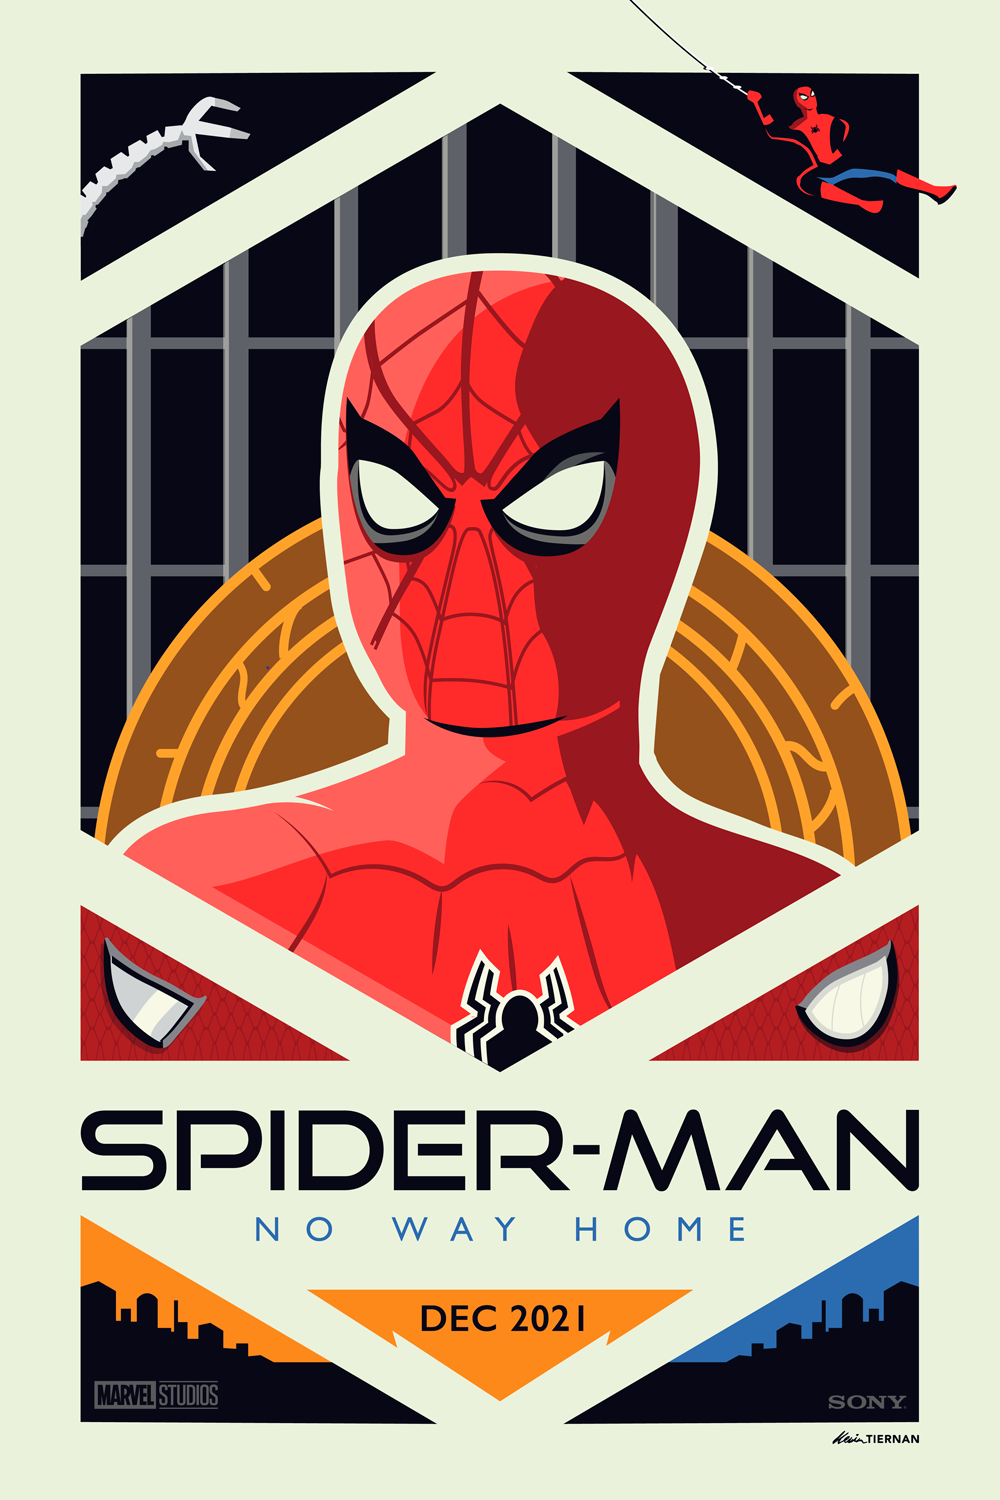 Home spider man poster way no Is the